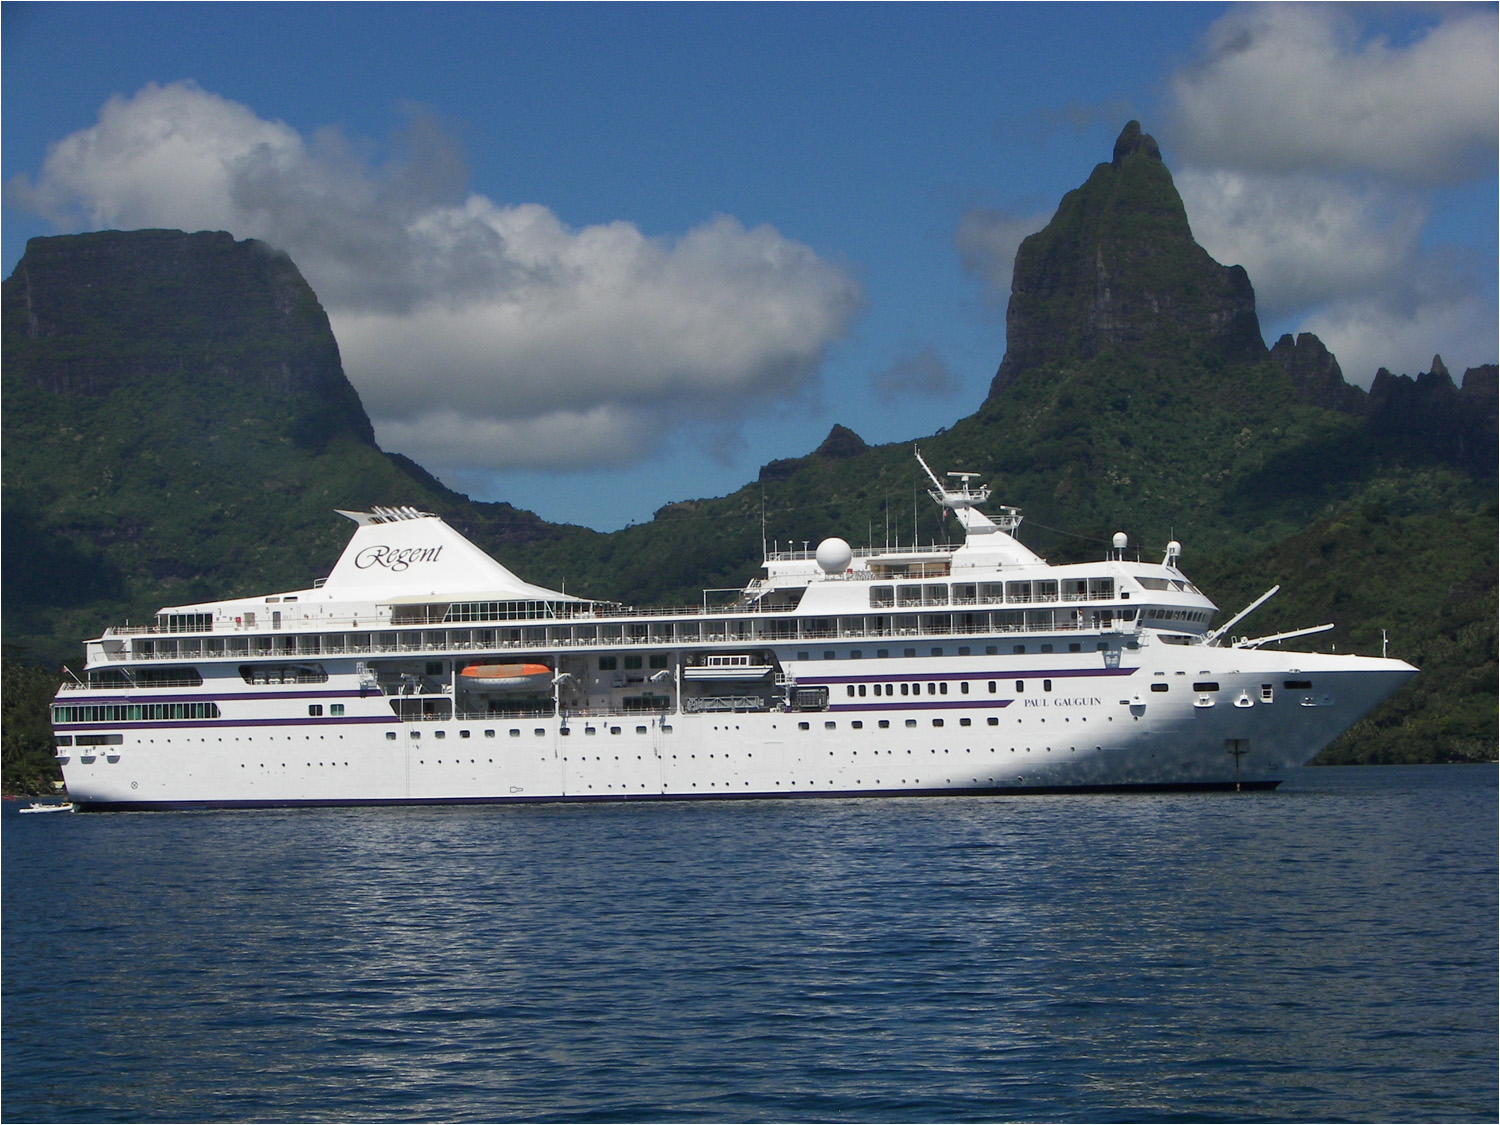 View of the Paul Gaugin anchored in the lagoon at Moorea.